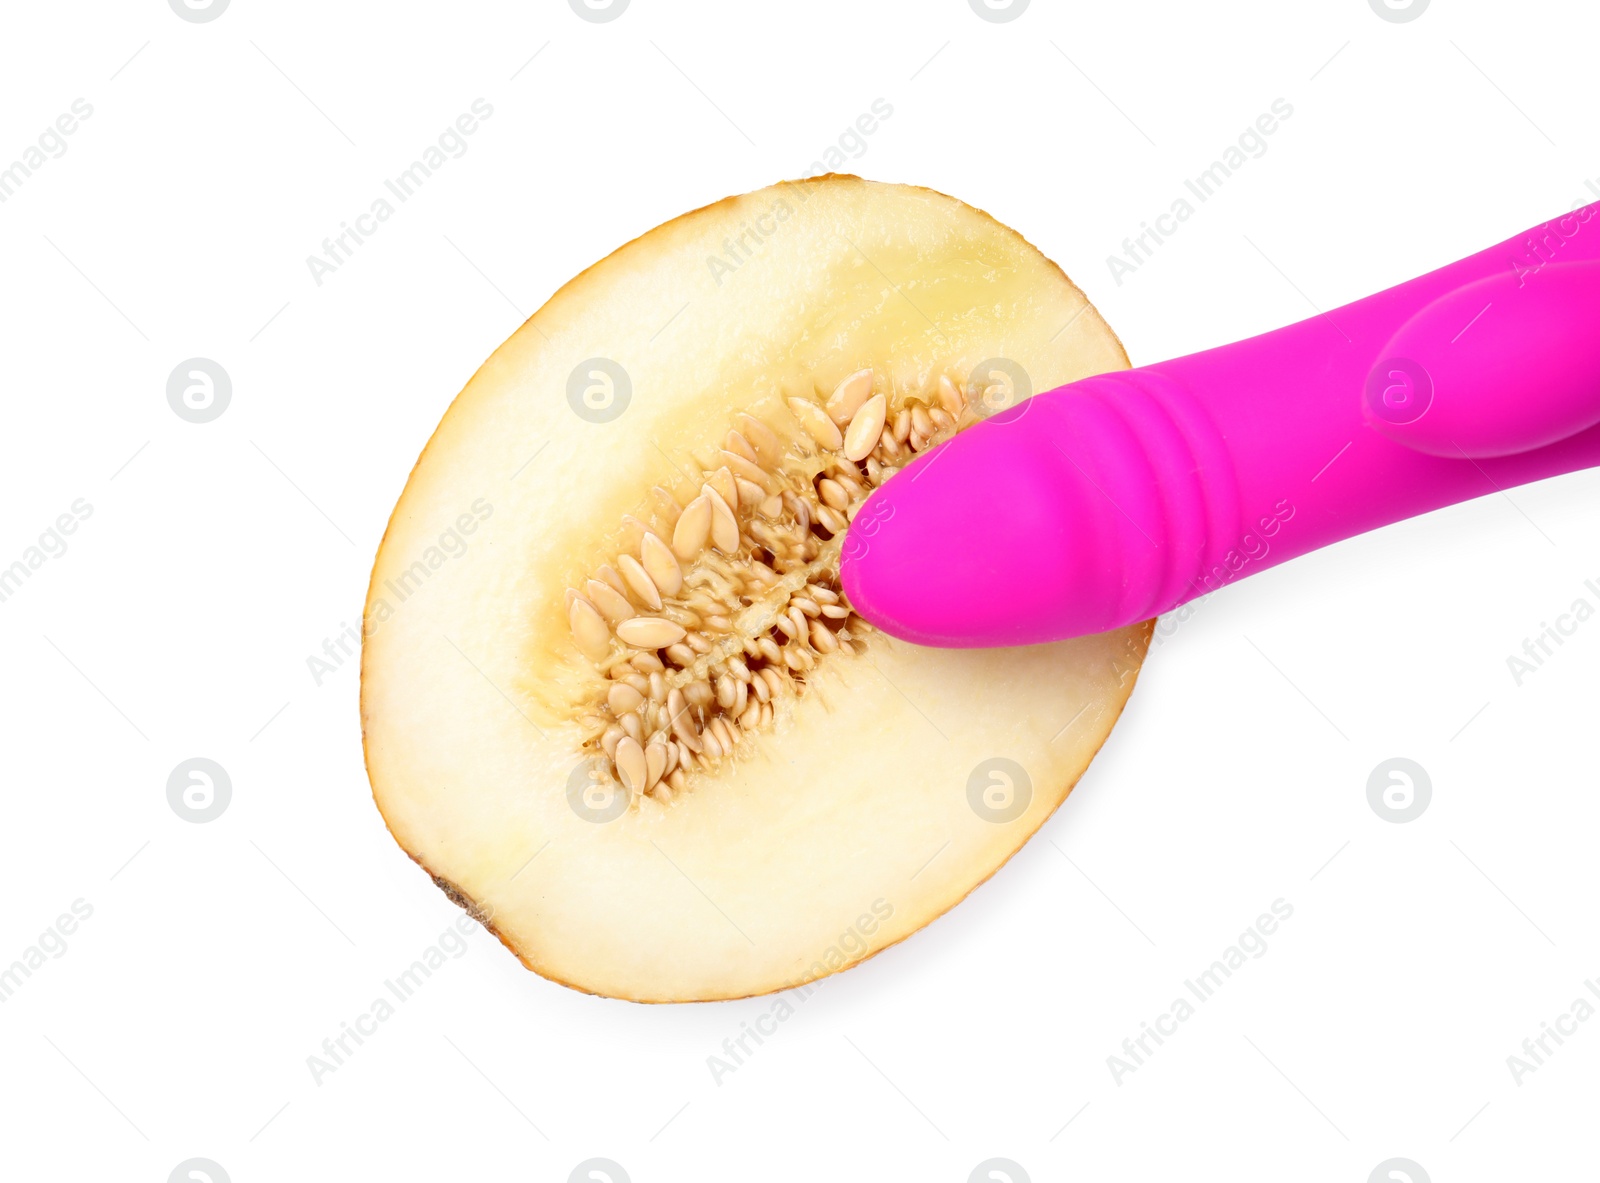 Photo of Half of melon and purple vibrator on white background, top view. Sex concept